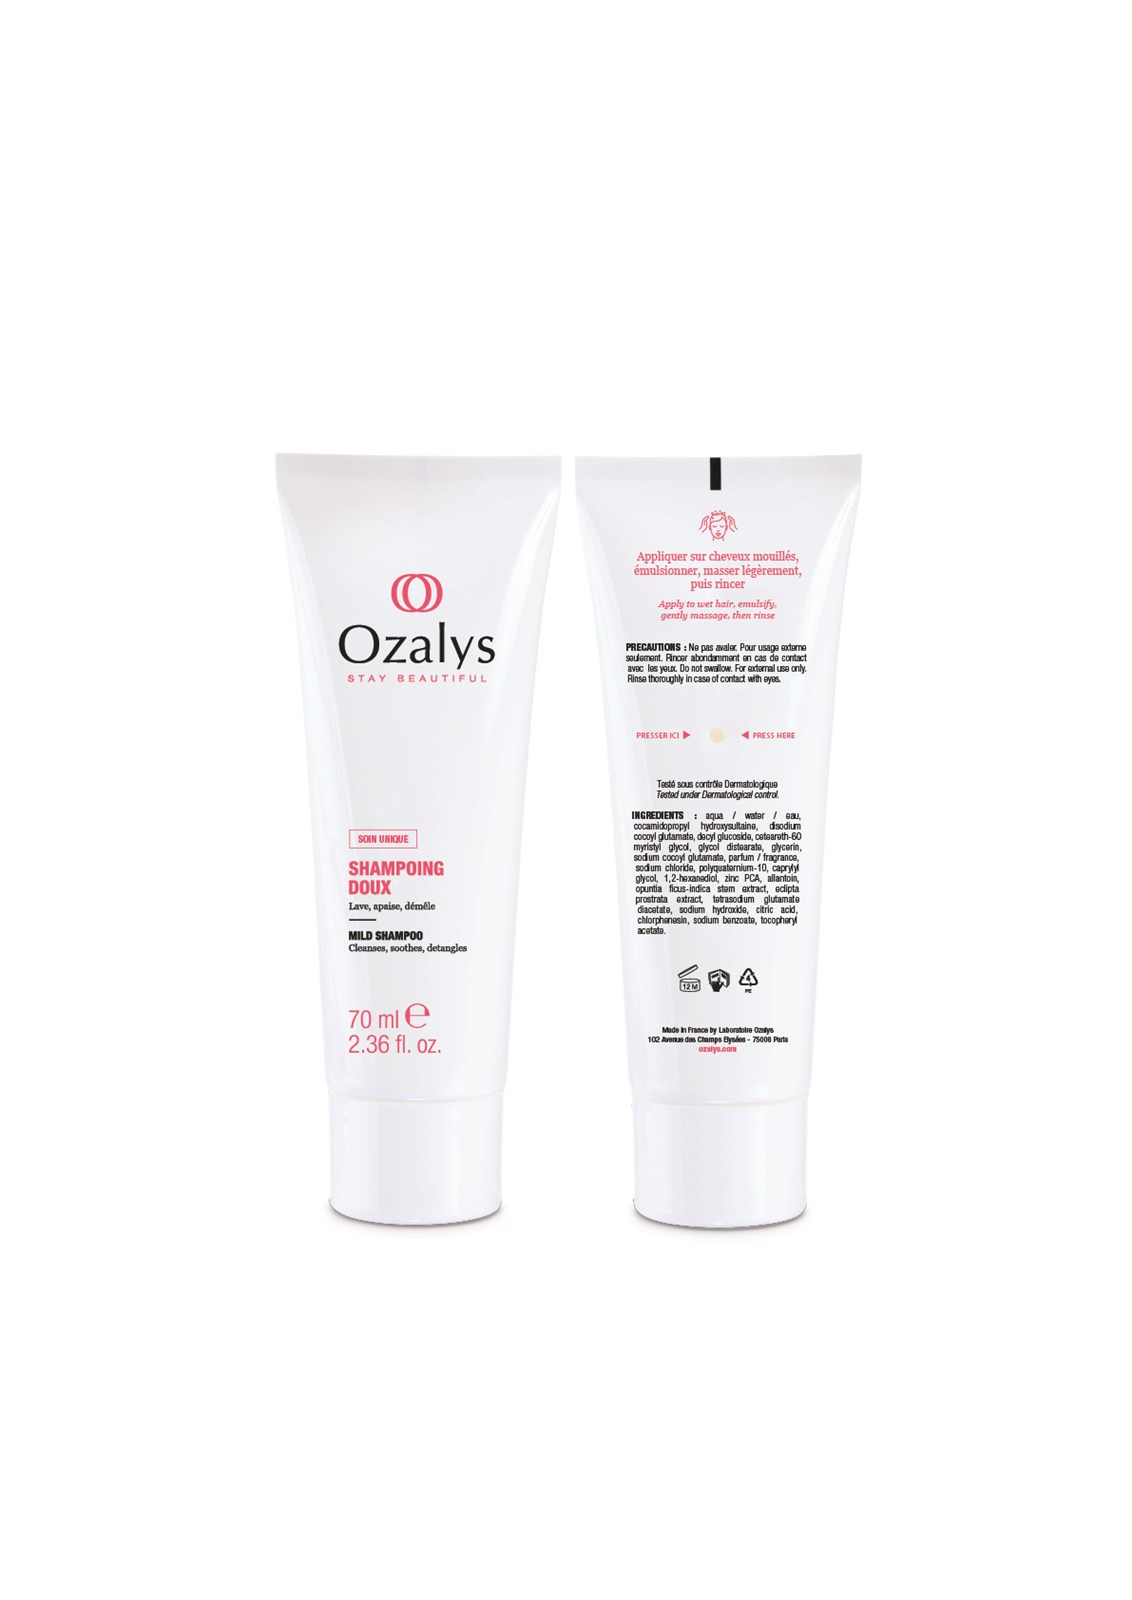 Cosmeceuticals » OZLAYS Gentle Shampoo 70ml - Medical Aesthetic Group